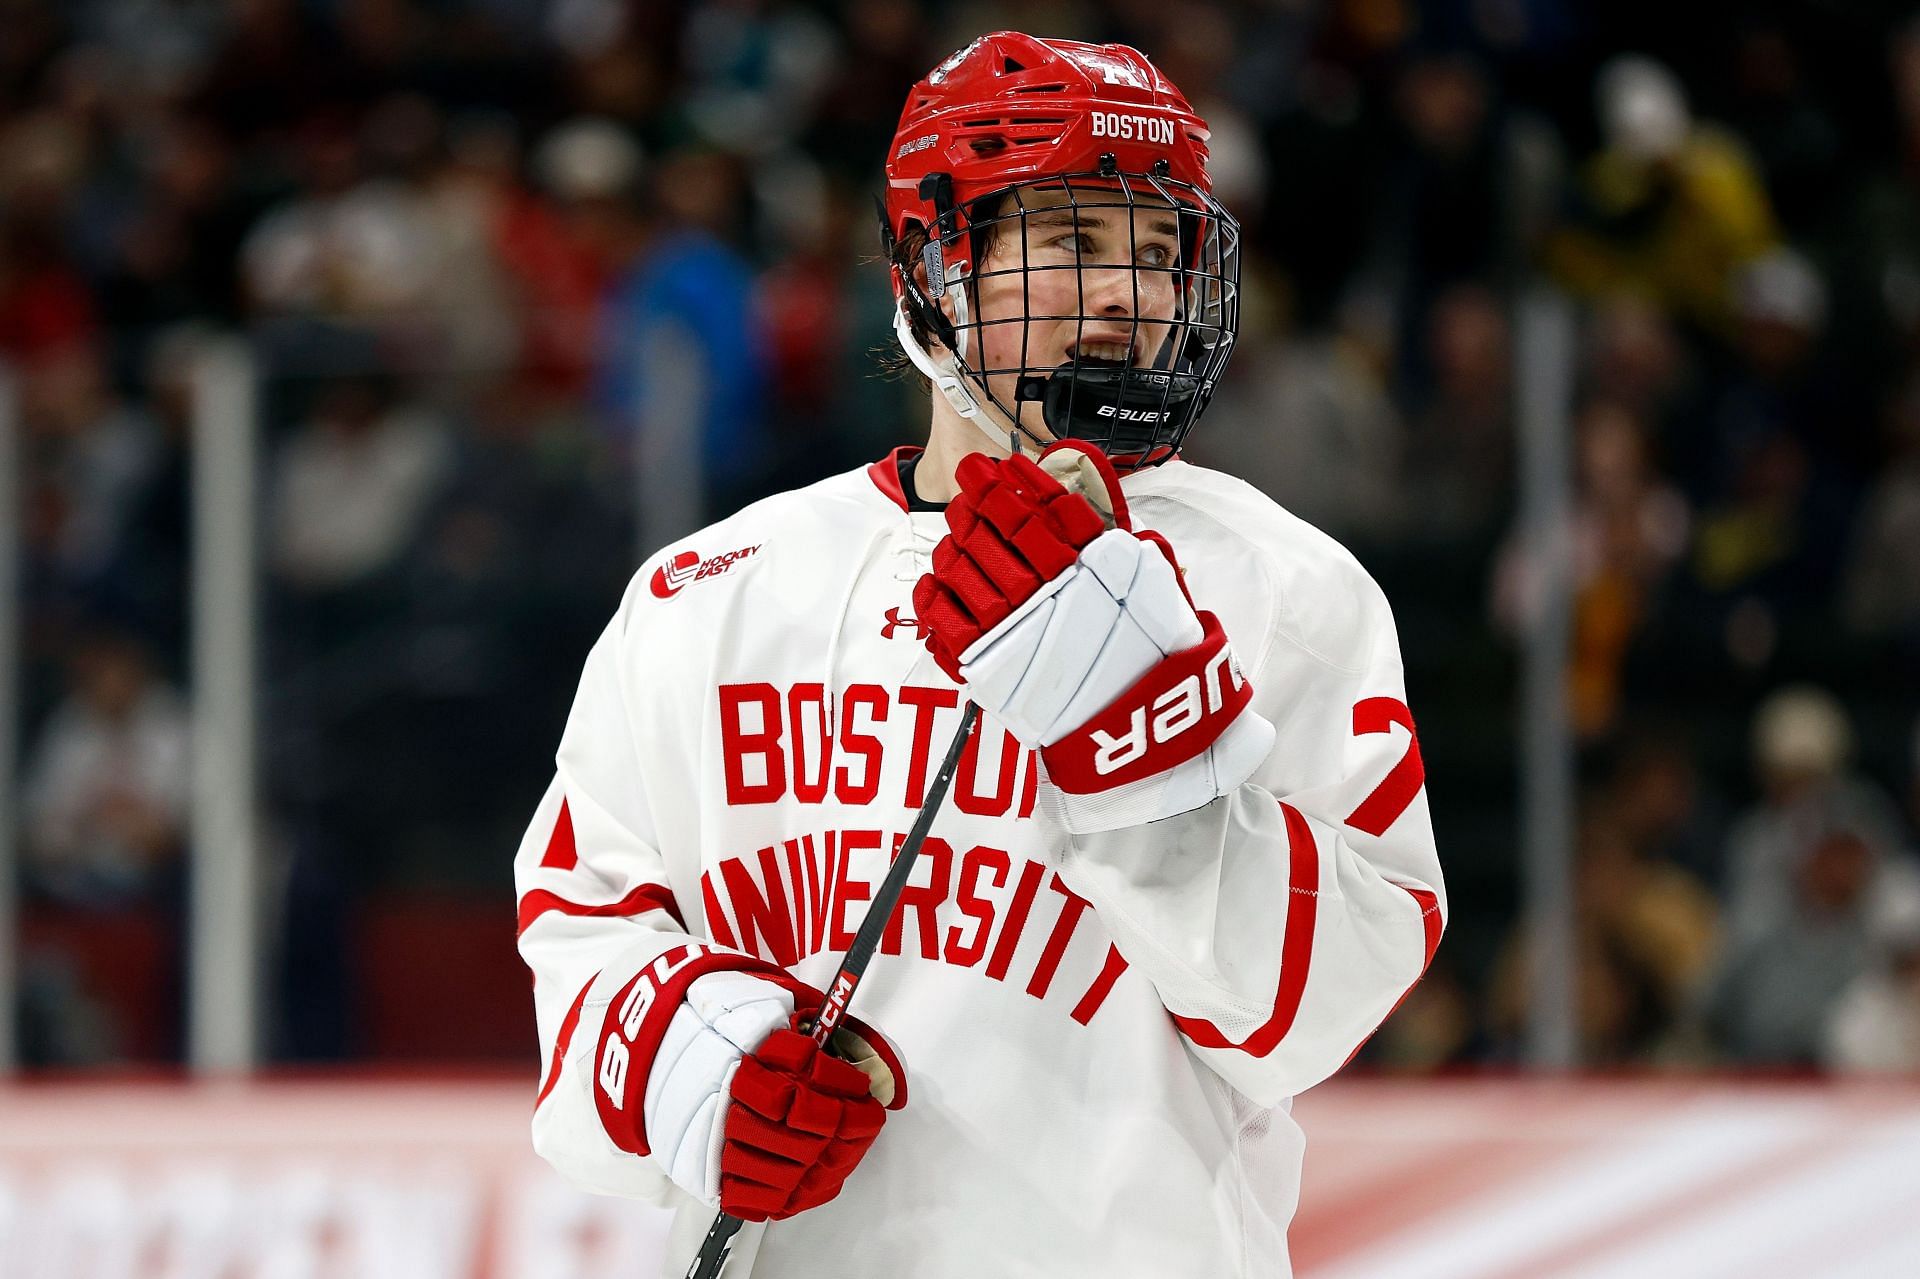 Macklin Celebrini almost gave the Terriers an early lead